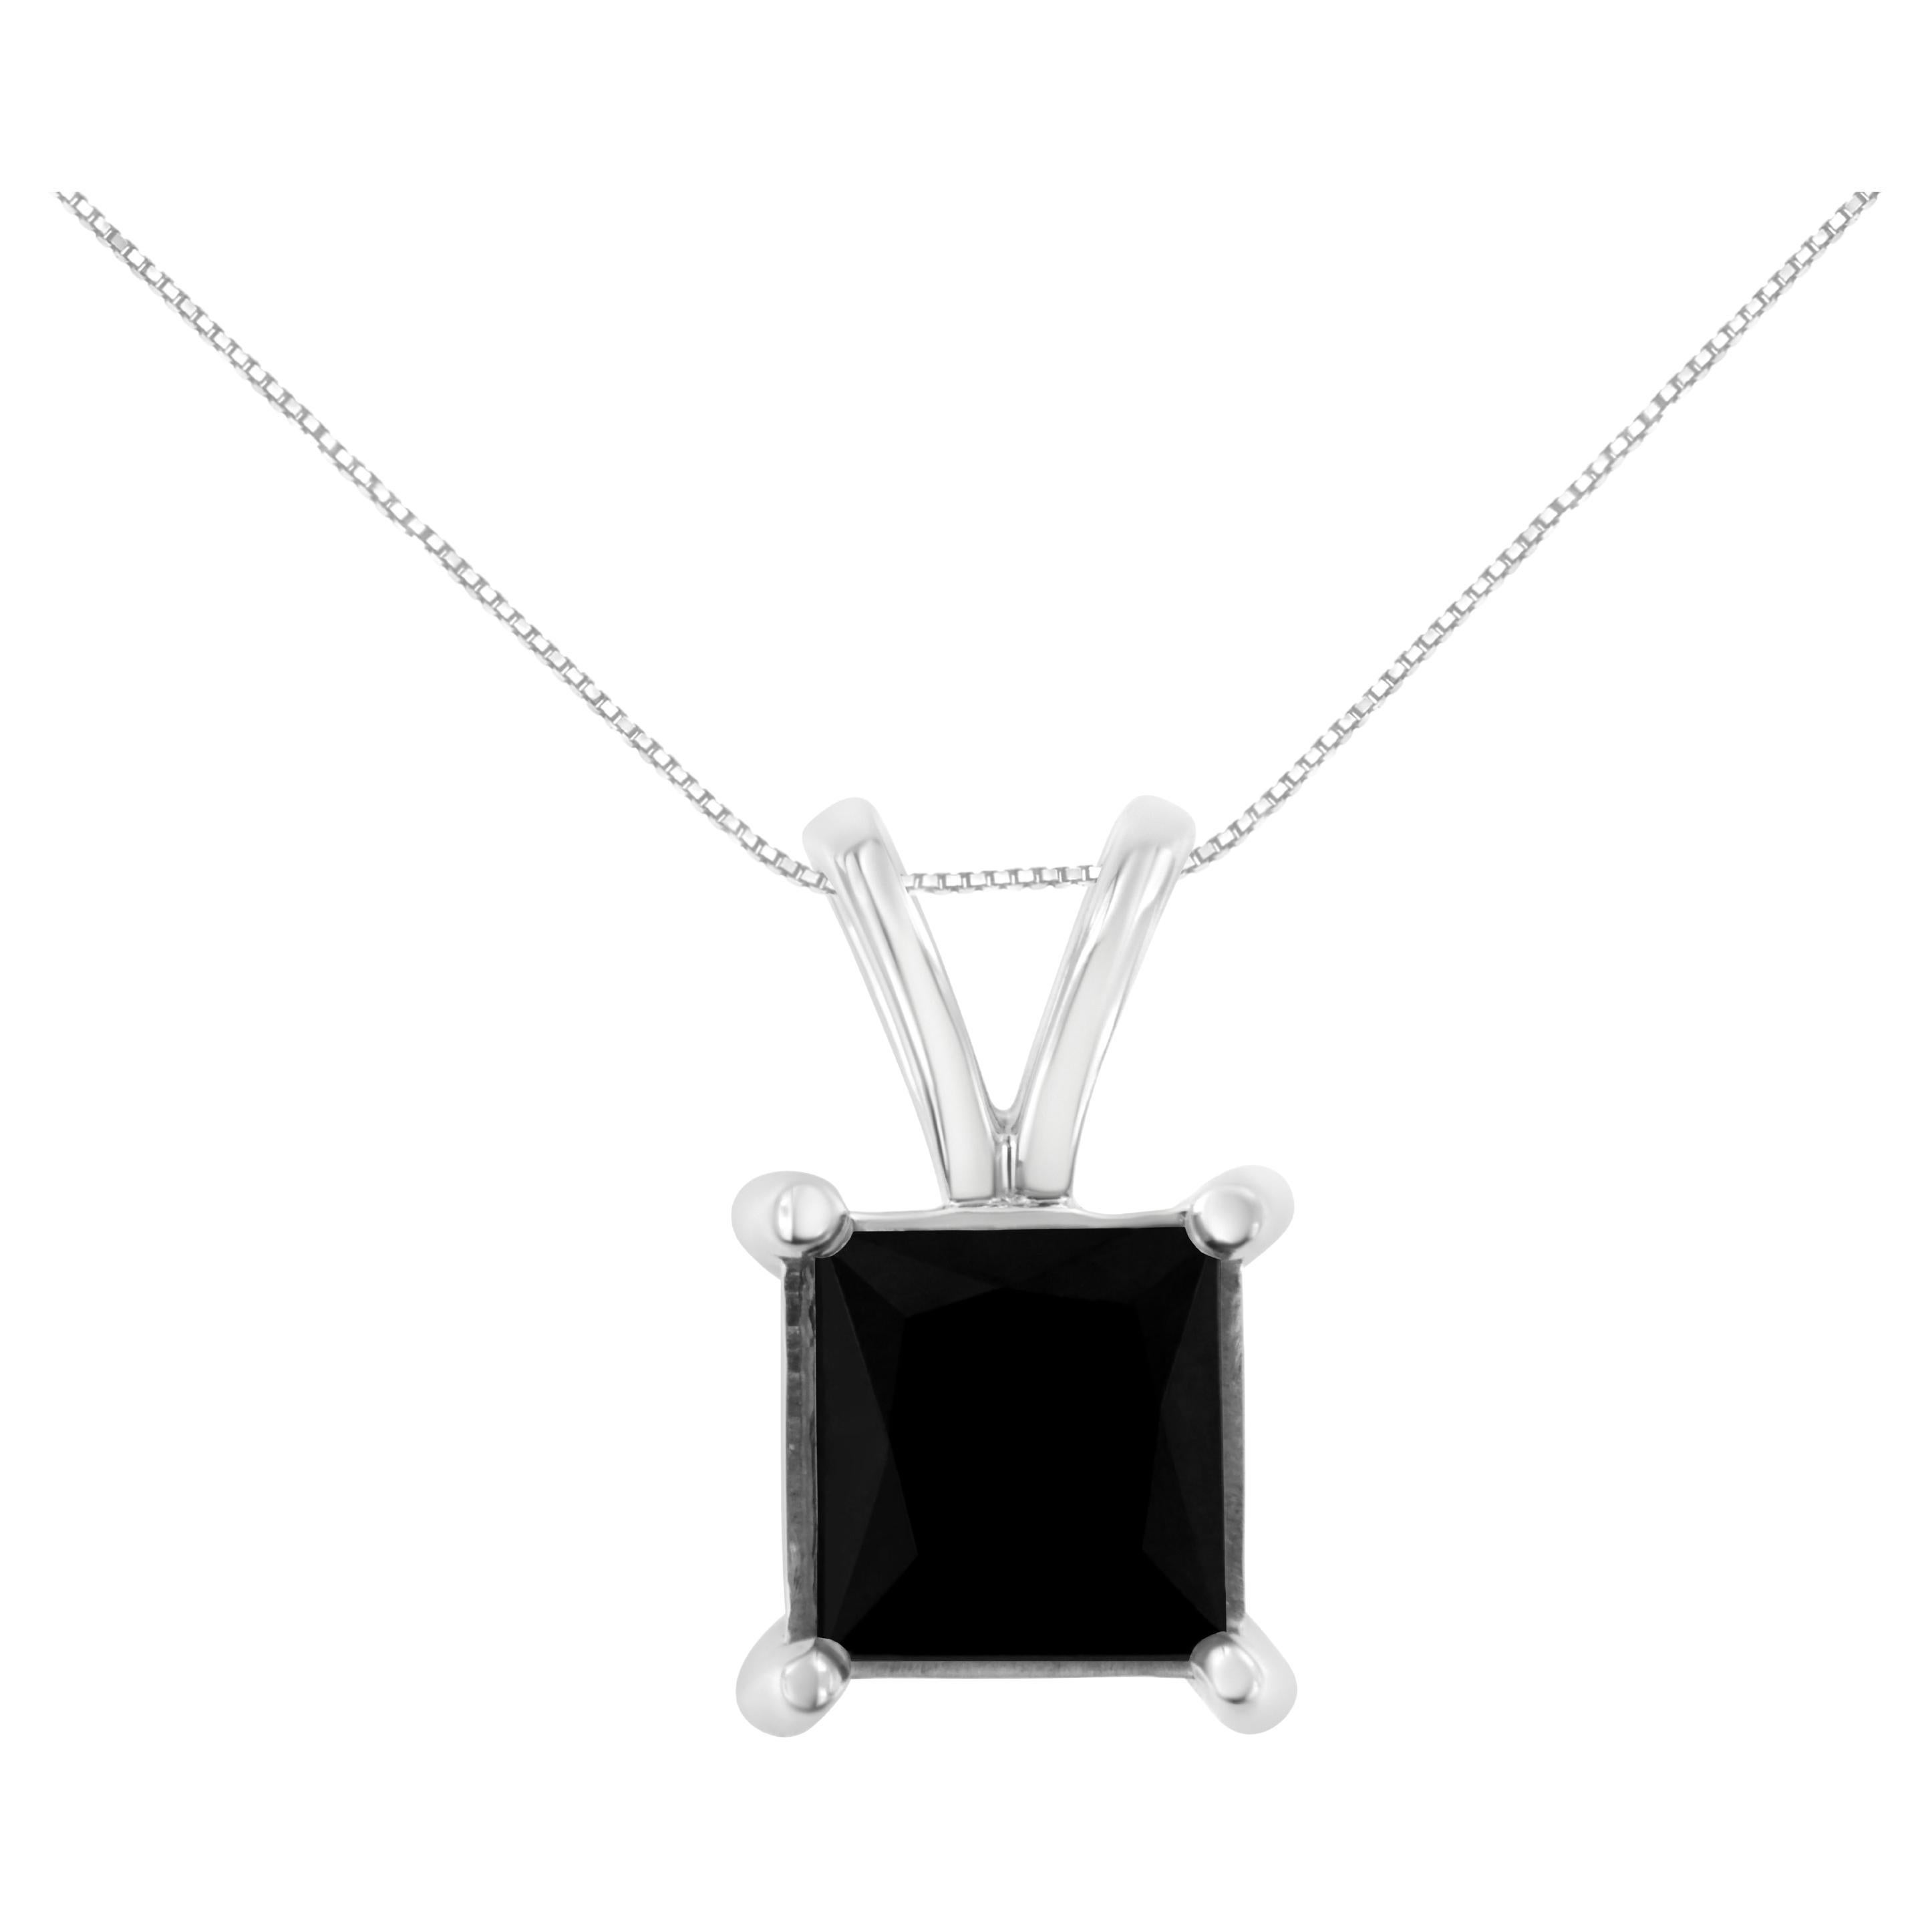 .925 Sterling Silver 3.0 Carat Treated Black Diamond Solitaire Pendant Necklace